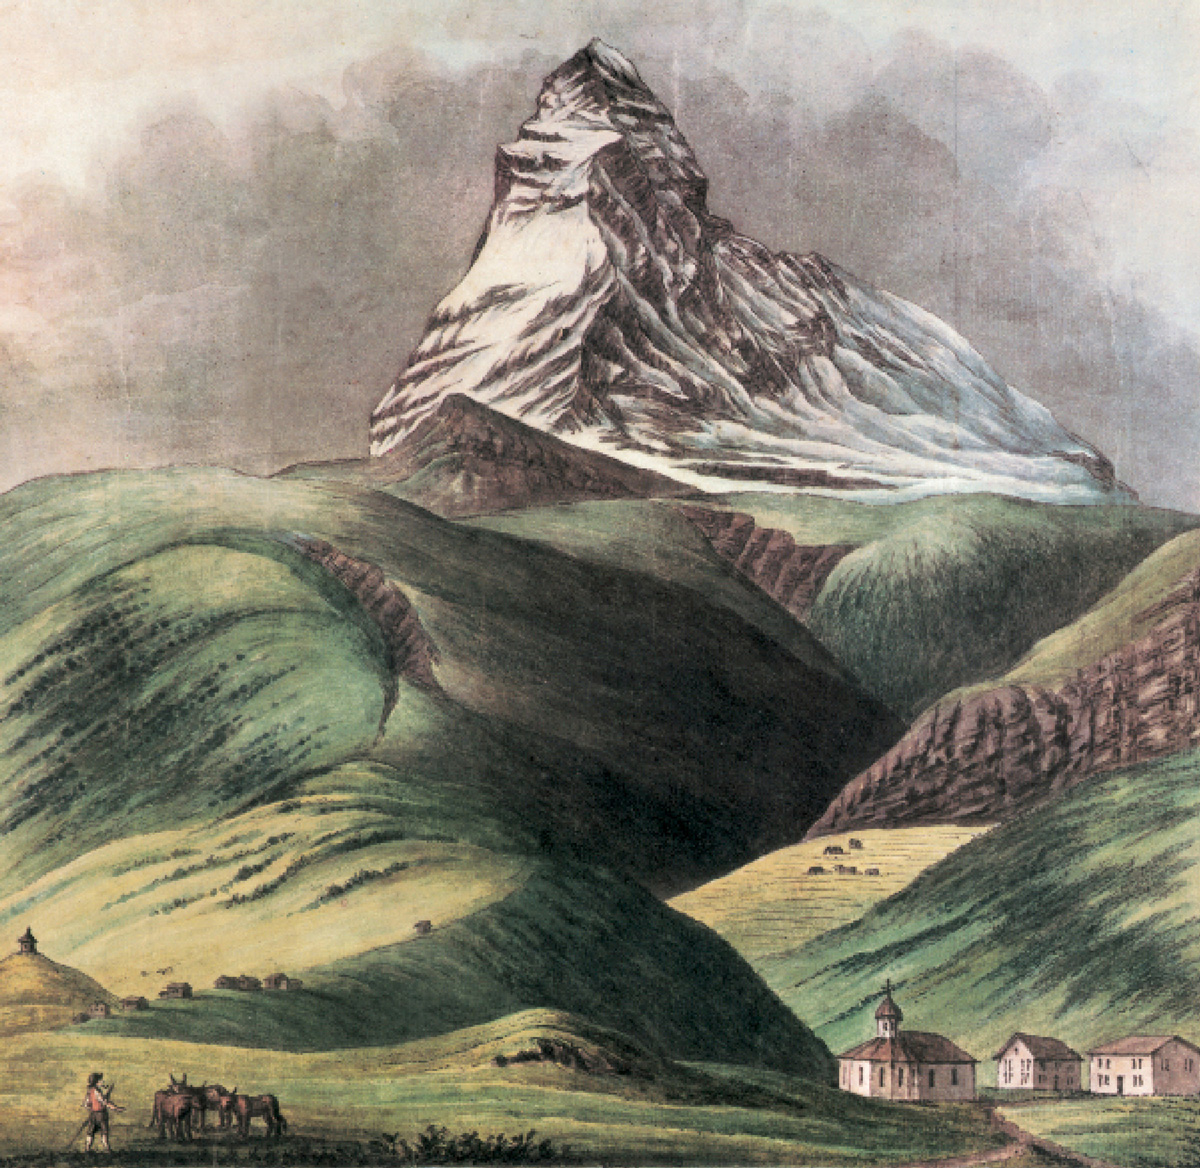 A view of the Matterhorn from the St. Niklaus Valley, drawn by Hans Conrad
Escher, 14 August 1806.